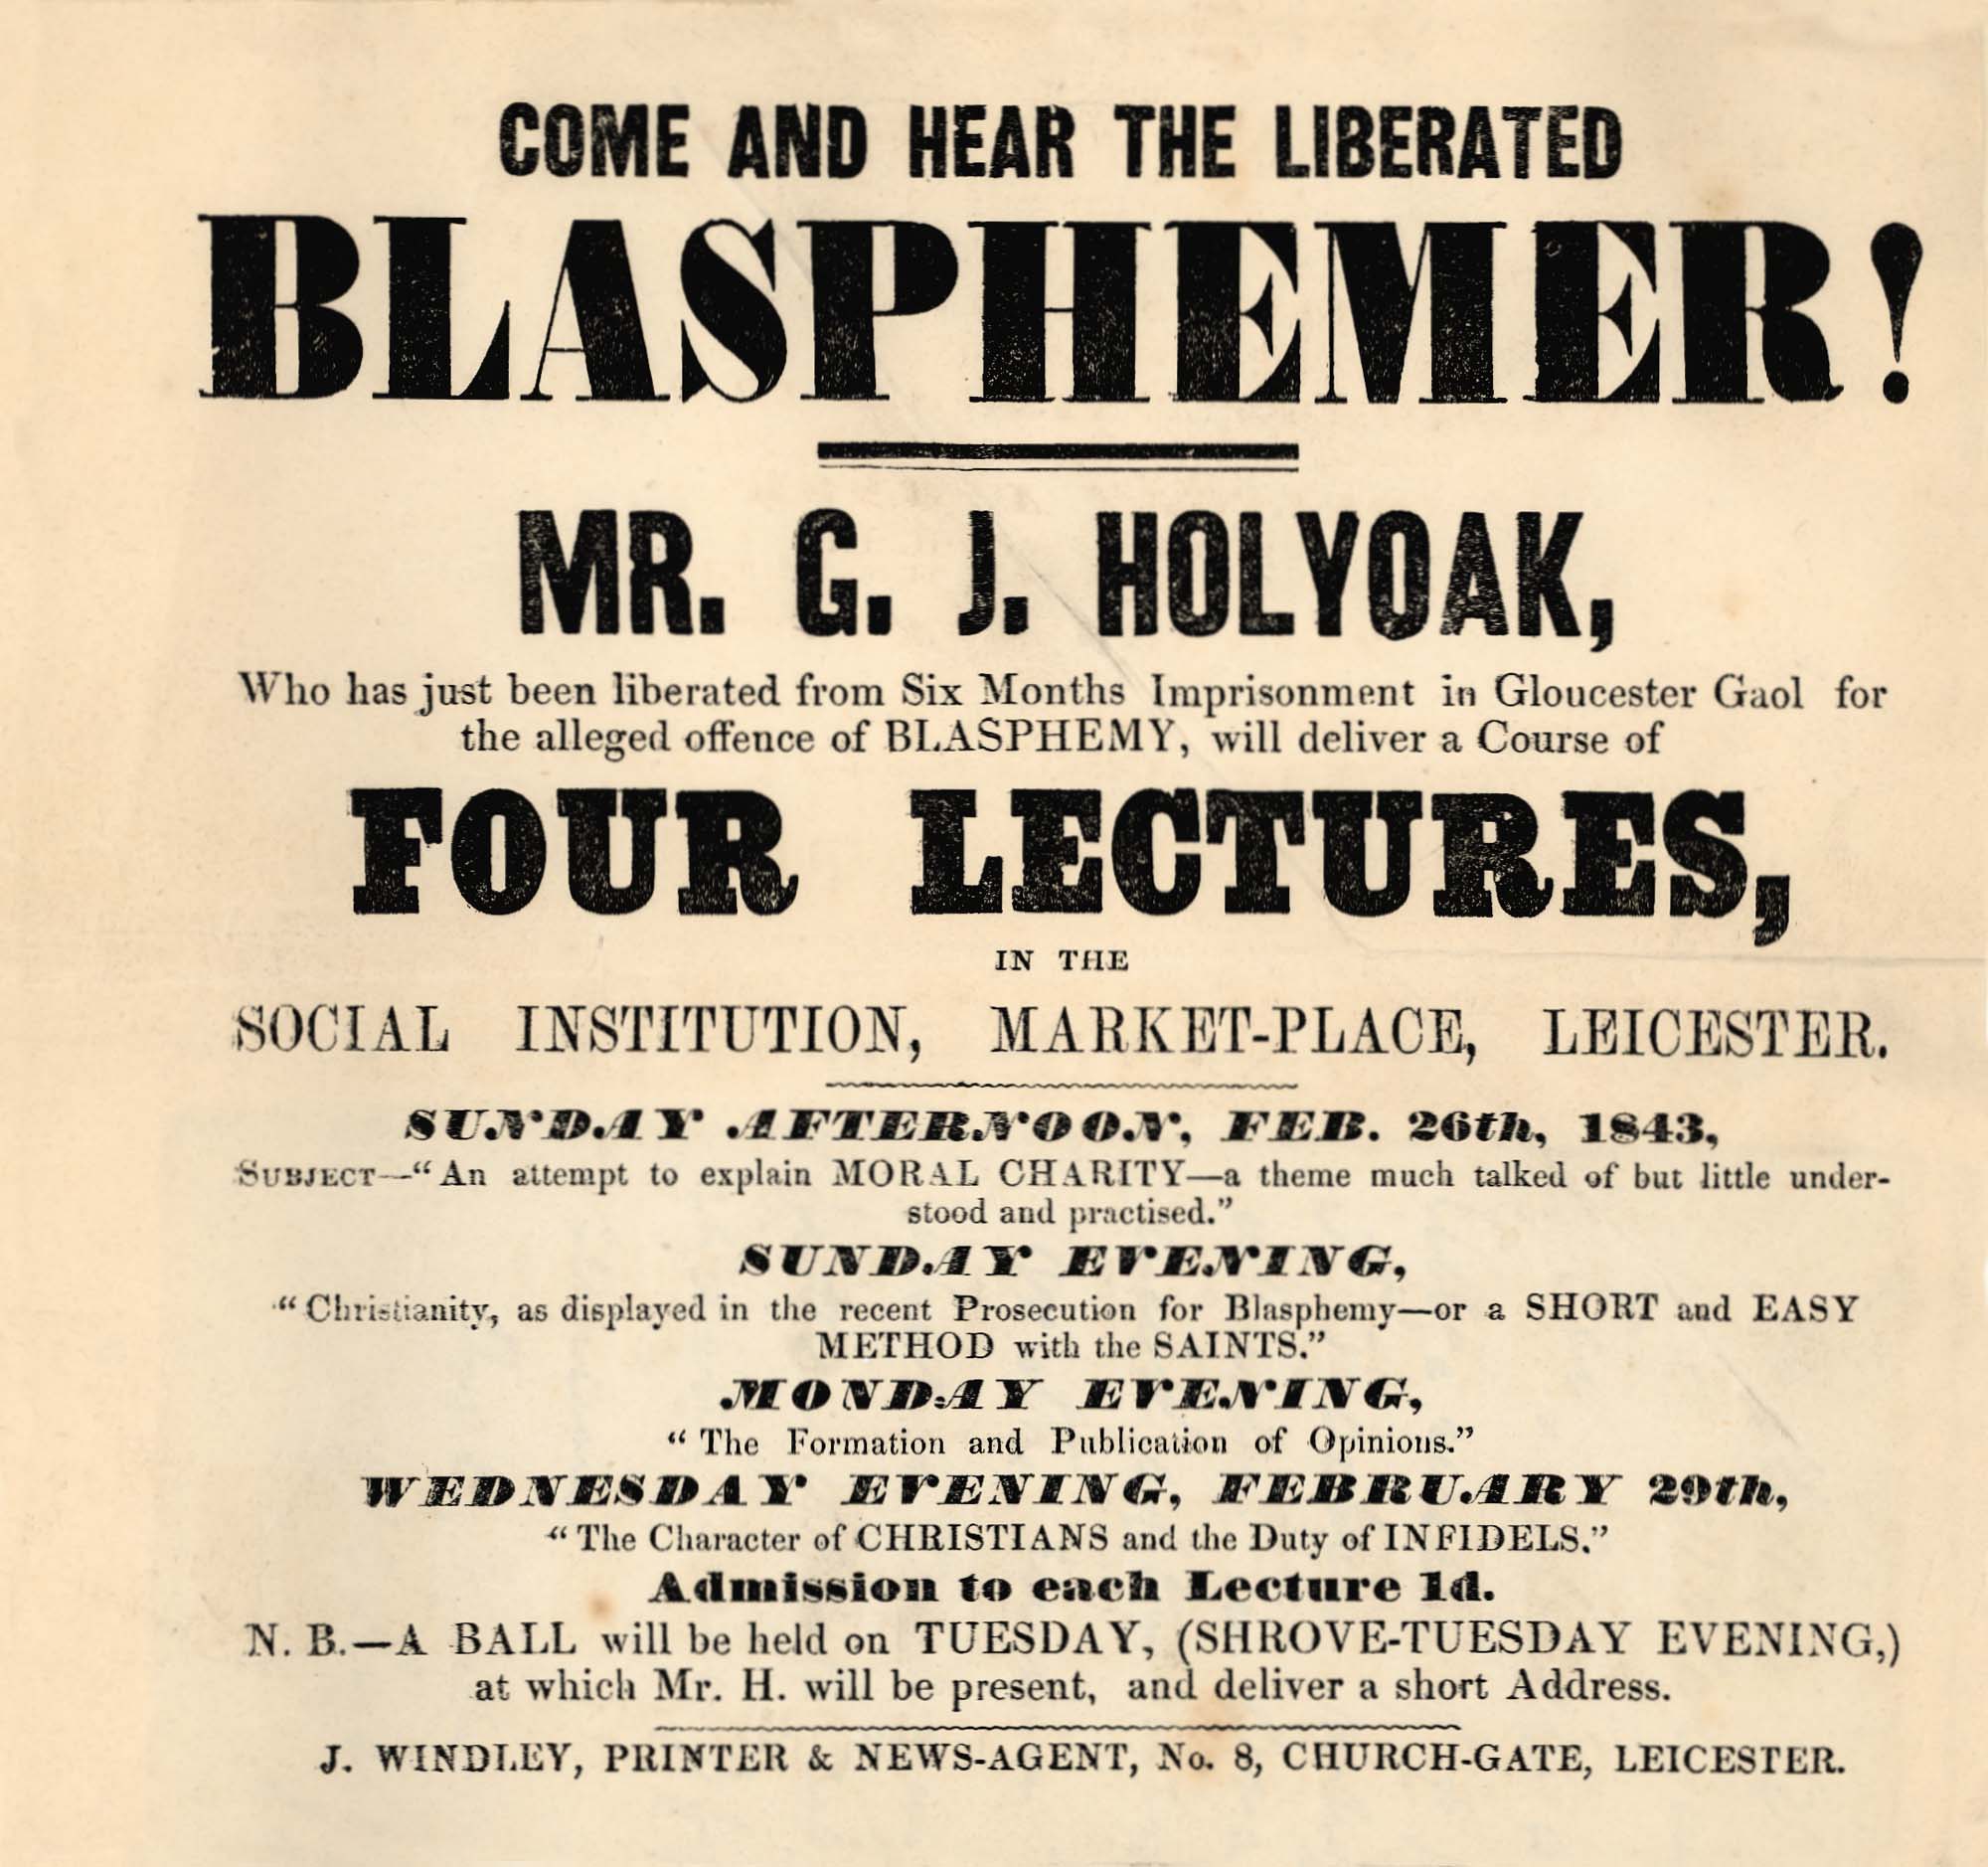 Advert for a talk by Mr. G.J. Holyoak, who was imprisoned for blasphemy -